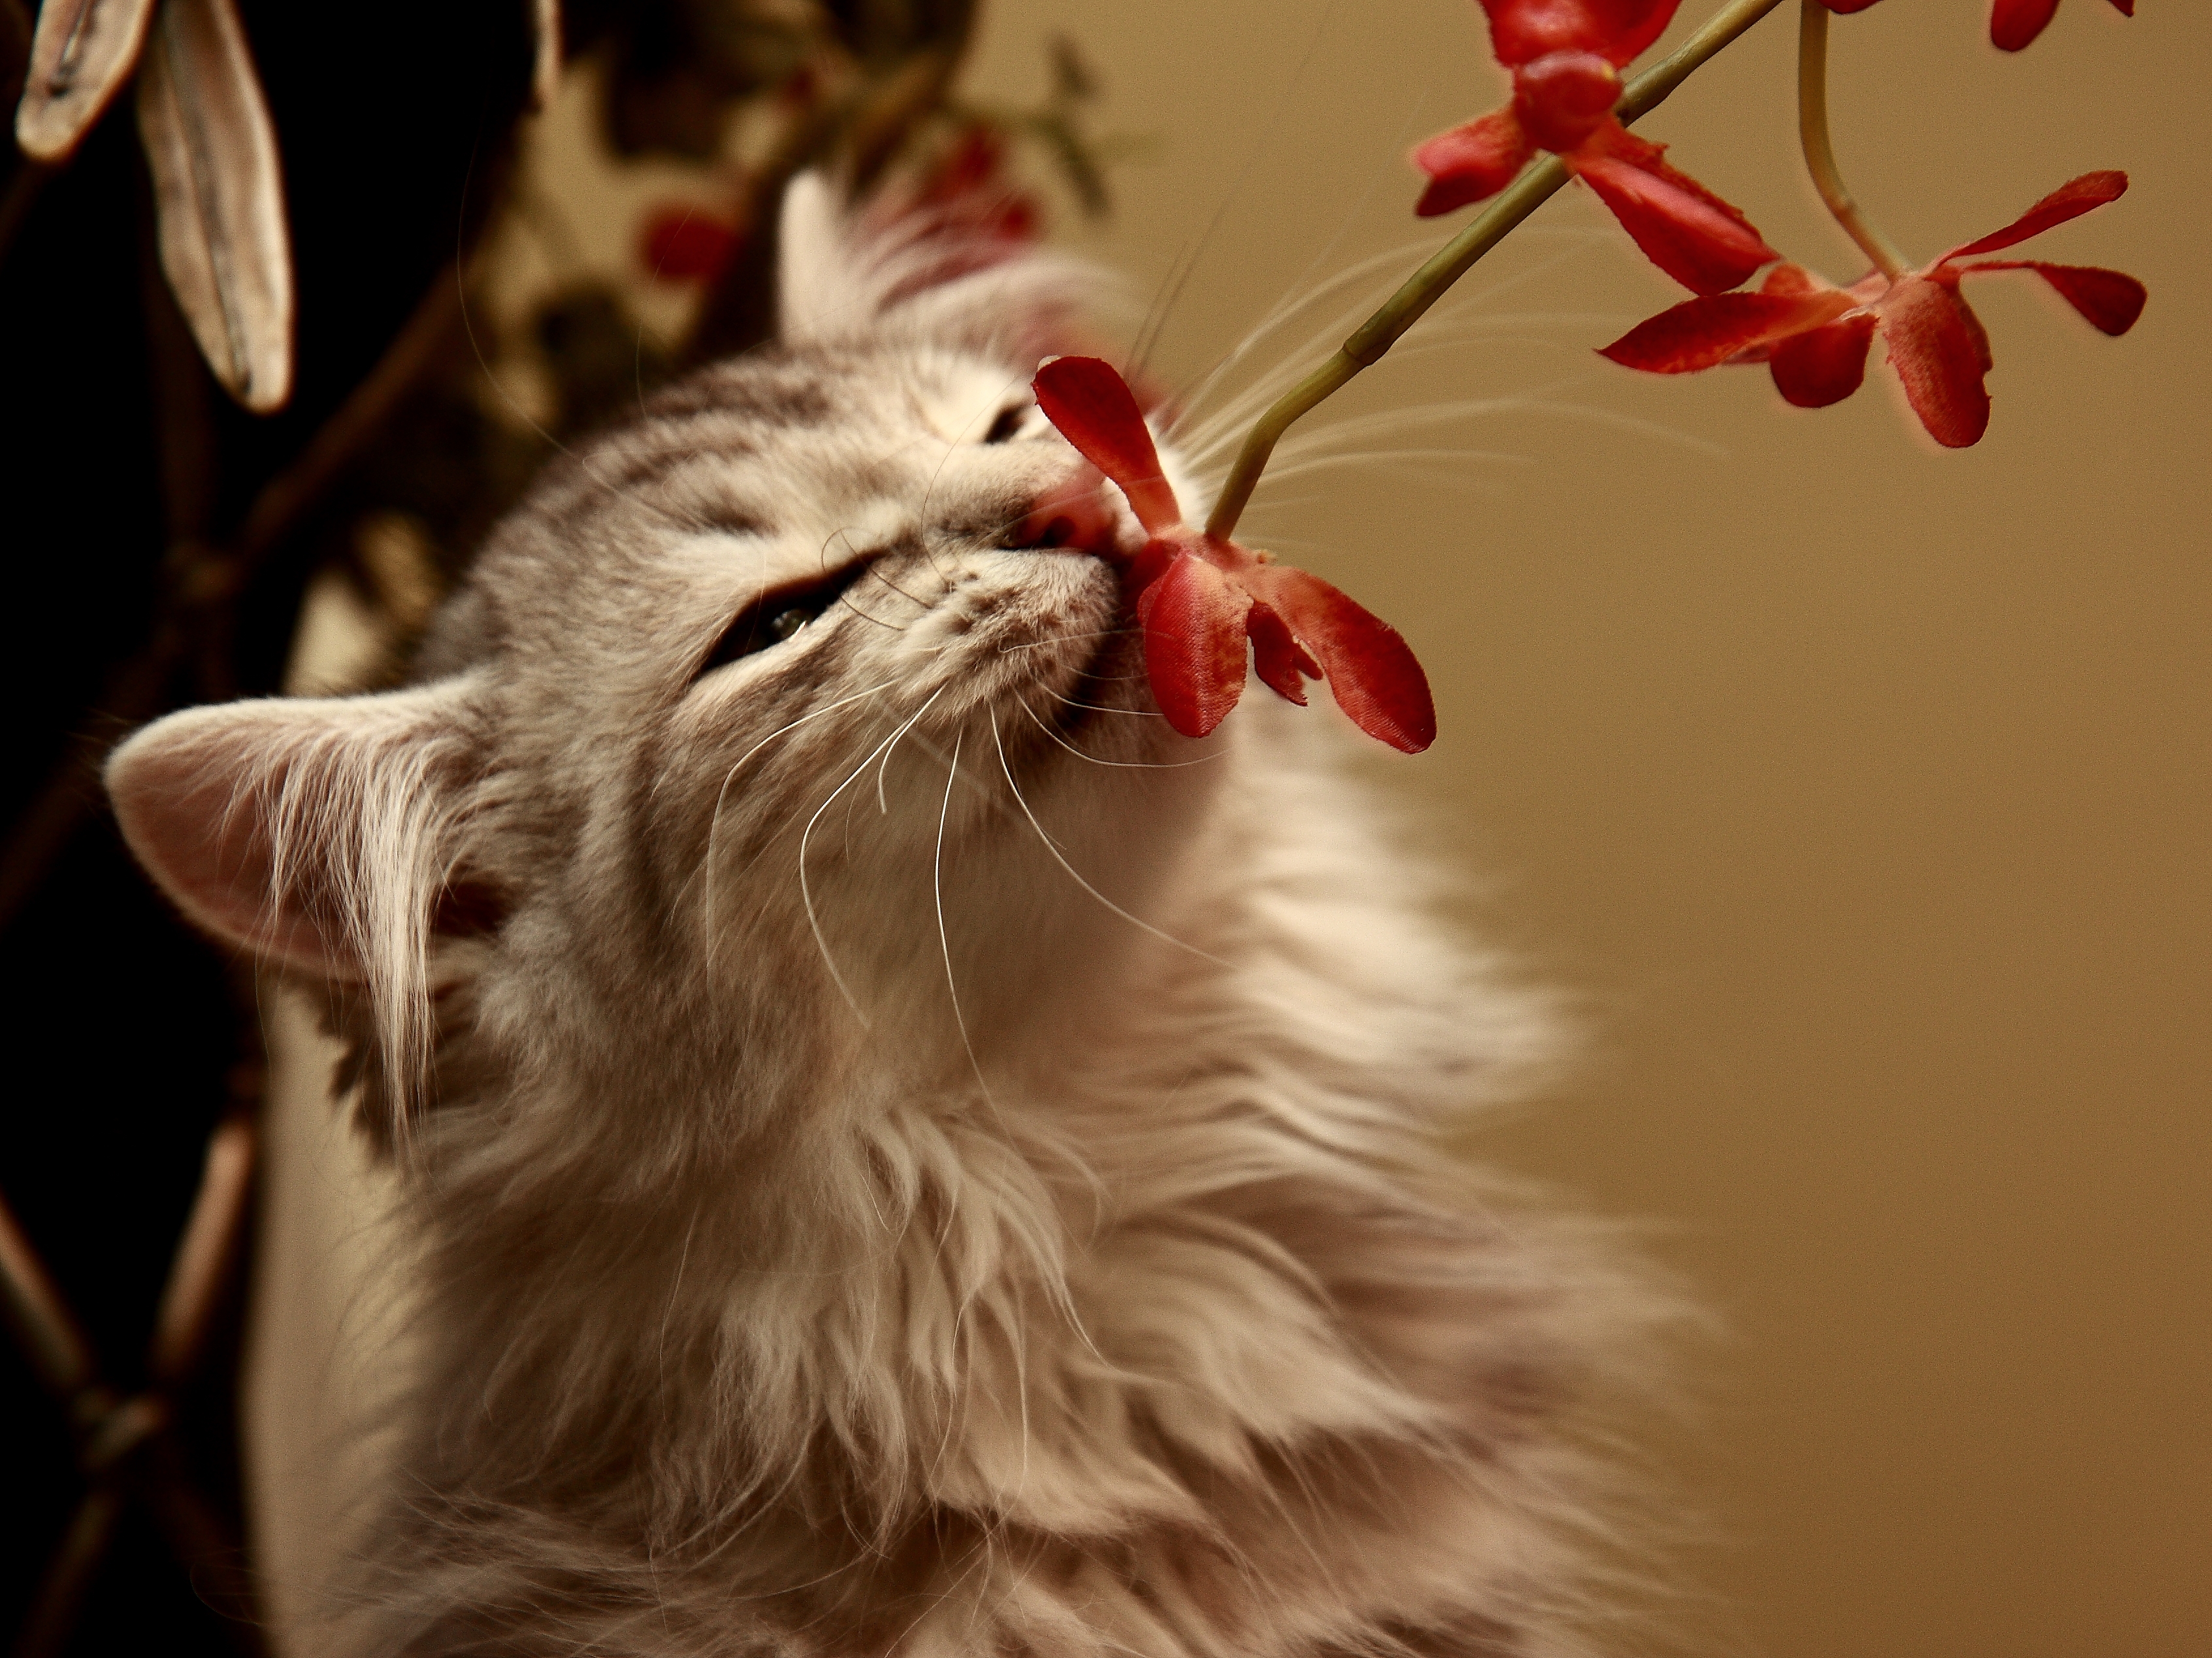 Kitty with flowers